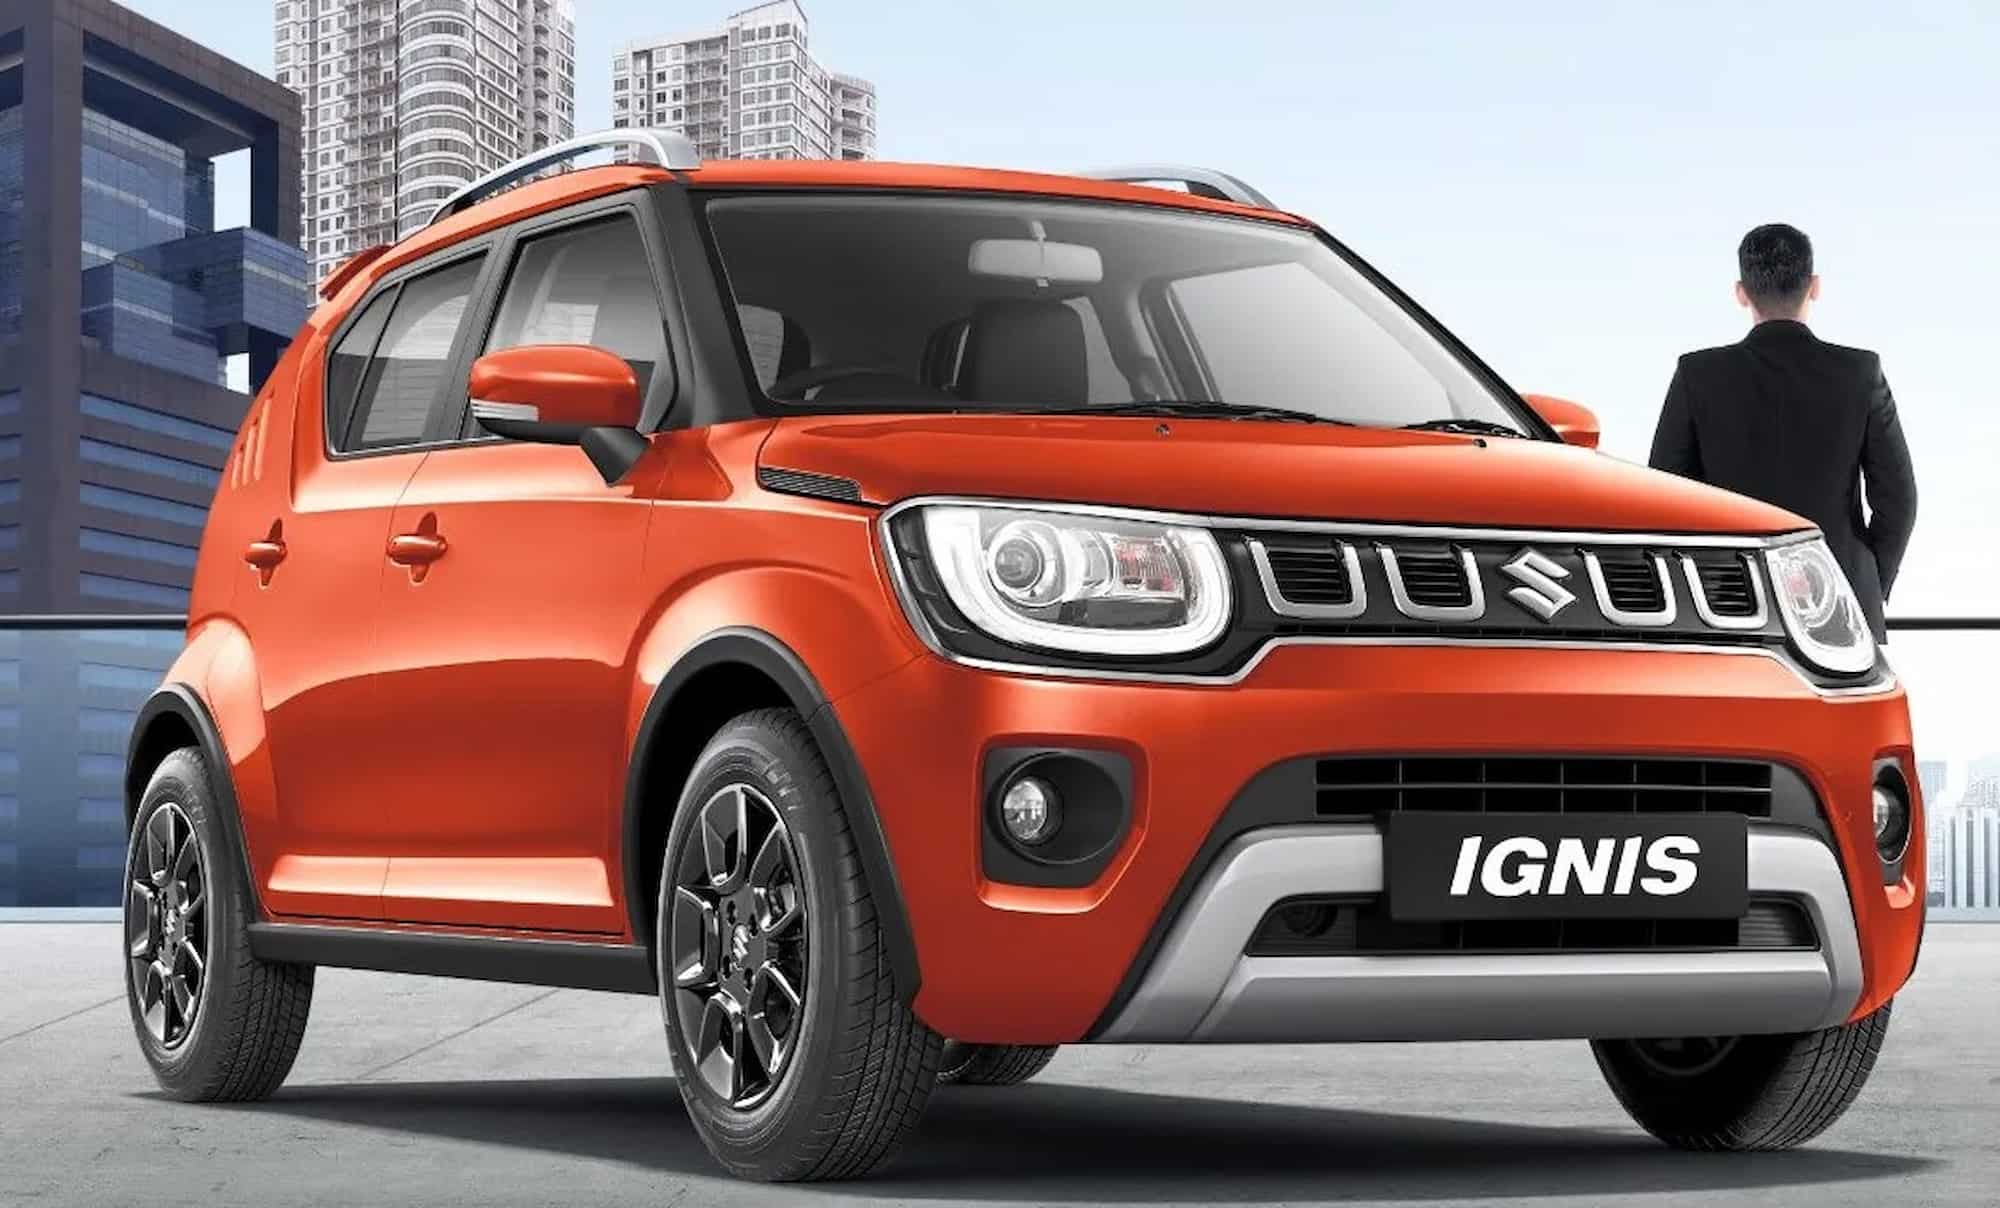 Копия 2021 Suzuki Ignis Now Available in Nepal e1613376149675 1